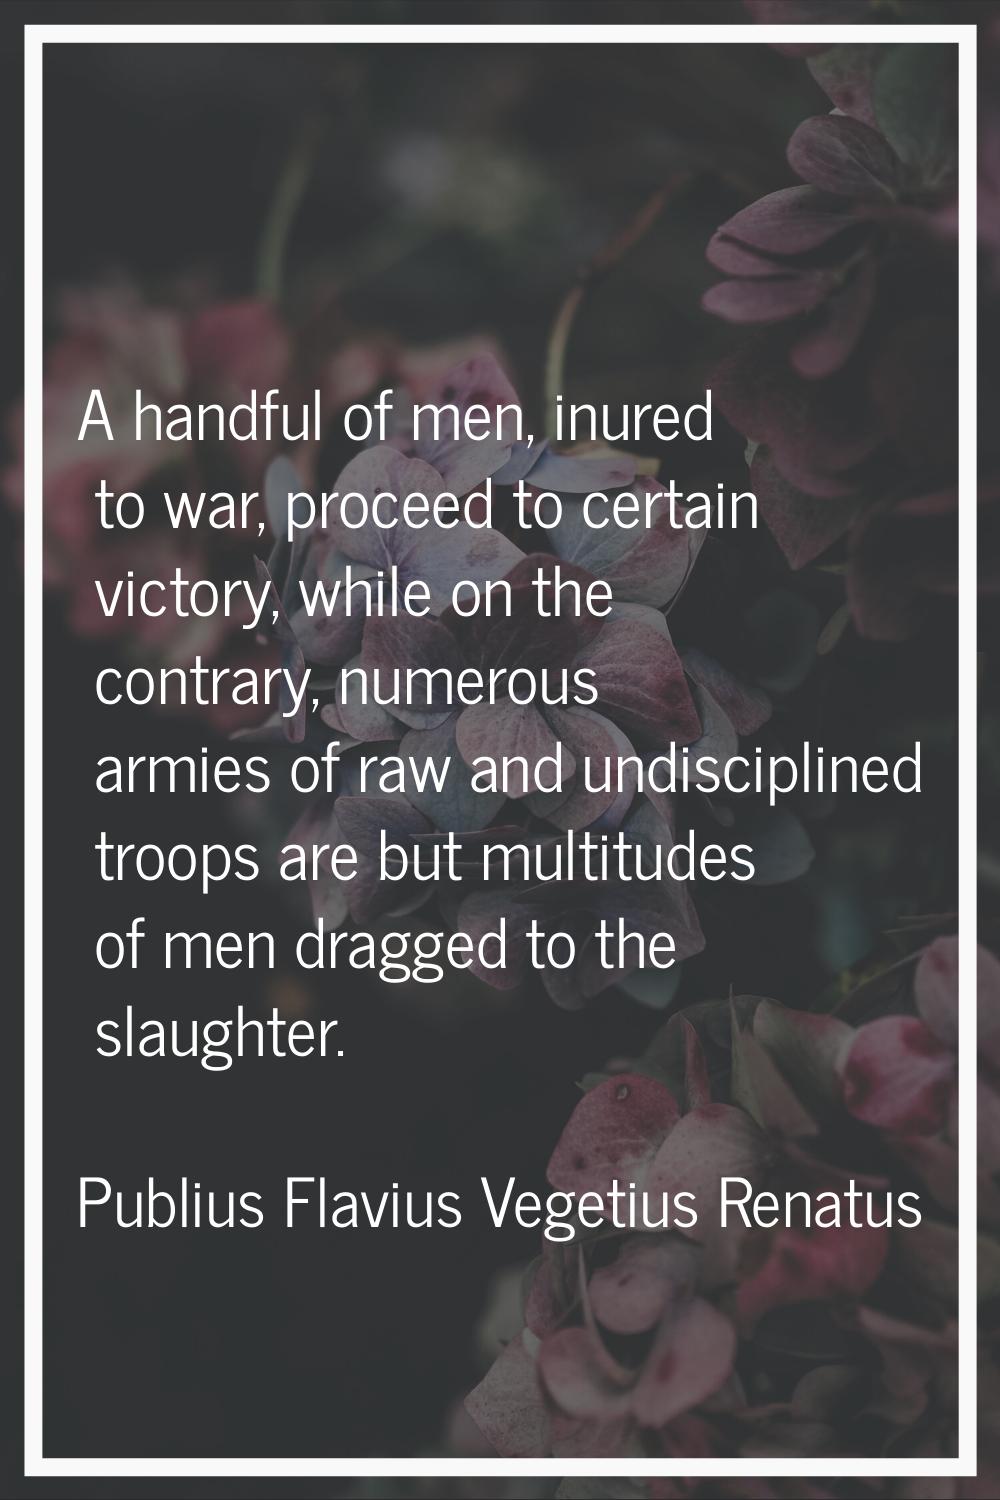 A handful of men, inured to war, proceed to certain victory, while on the contrary, numerous armies